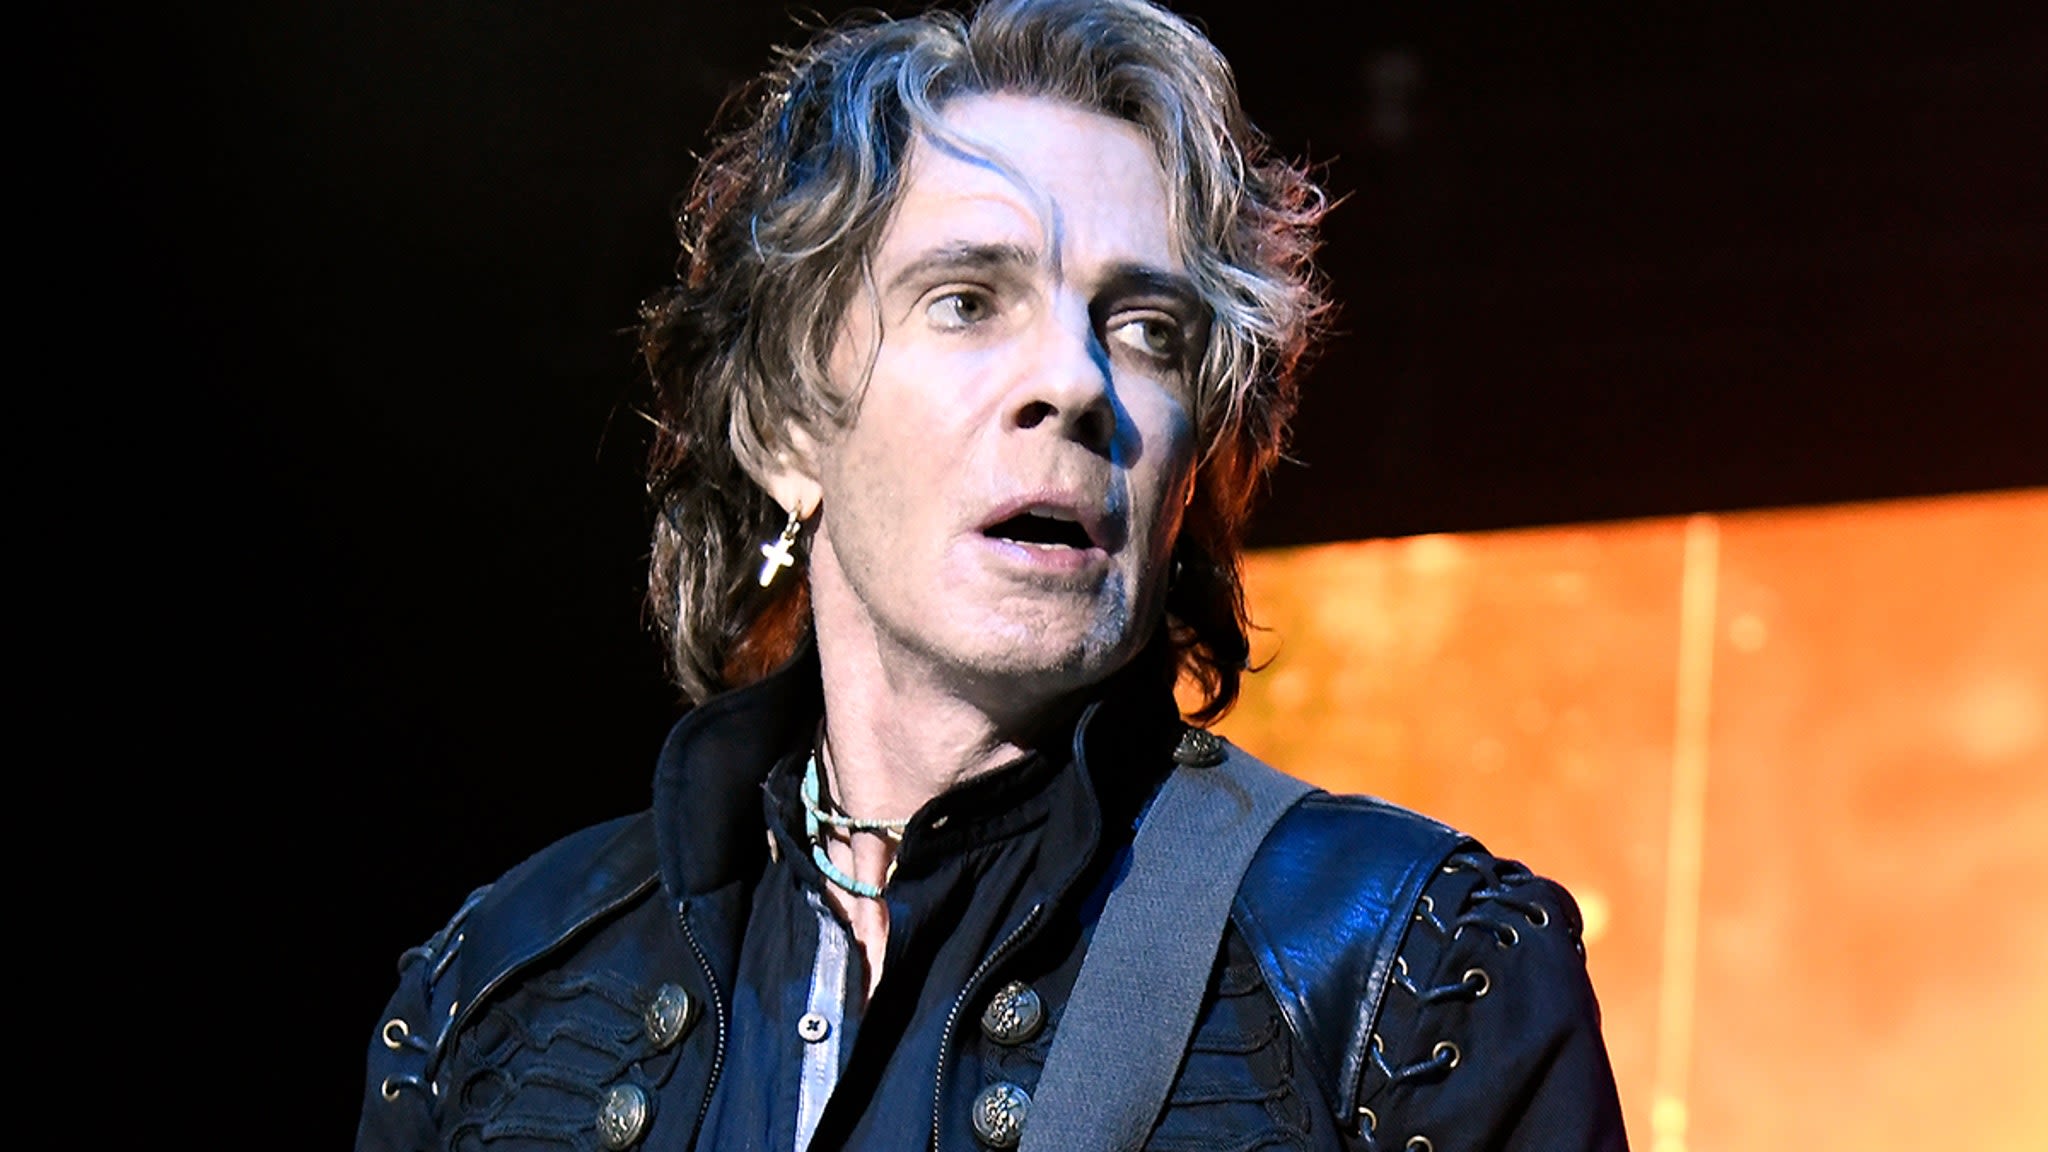 Rick Springfield Fan Shows Up at His Home Twice, Cops Called